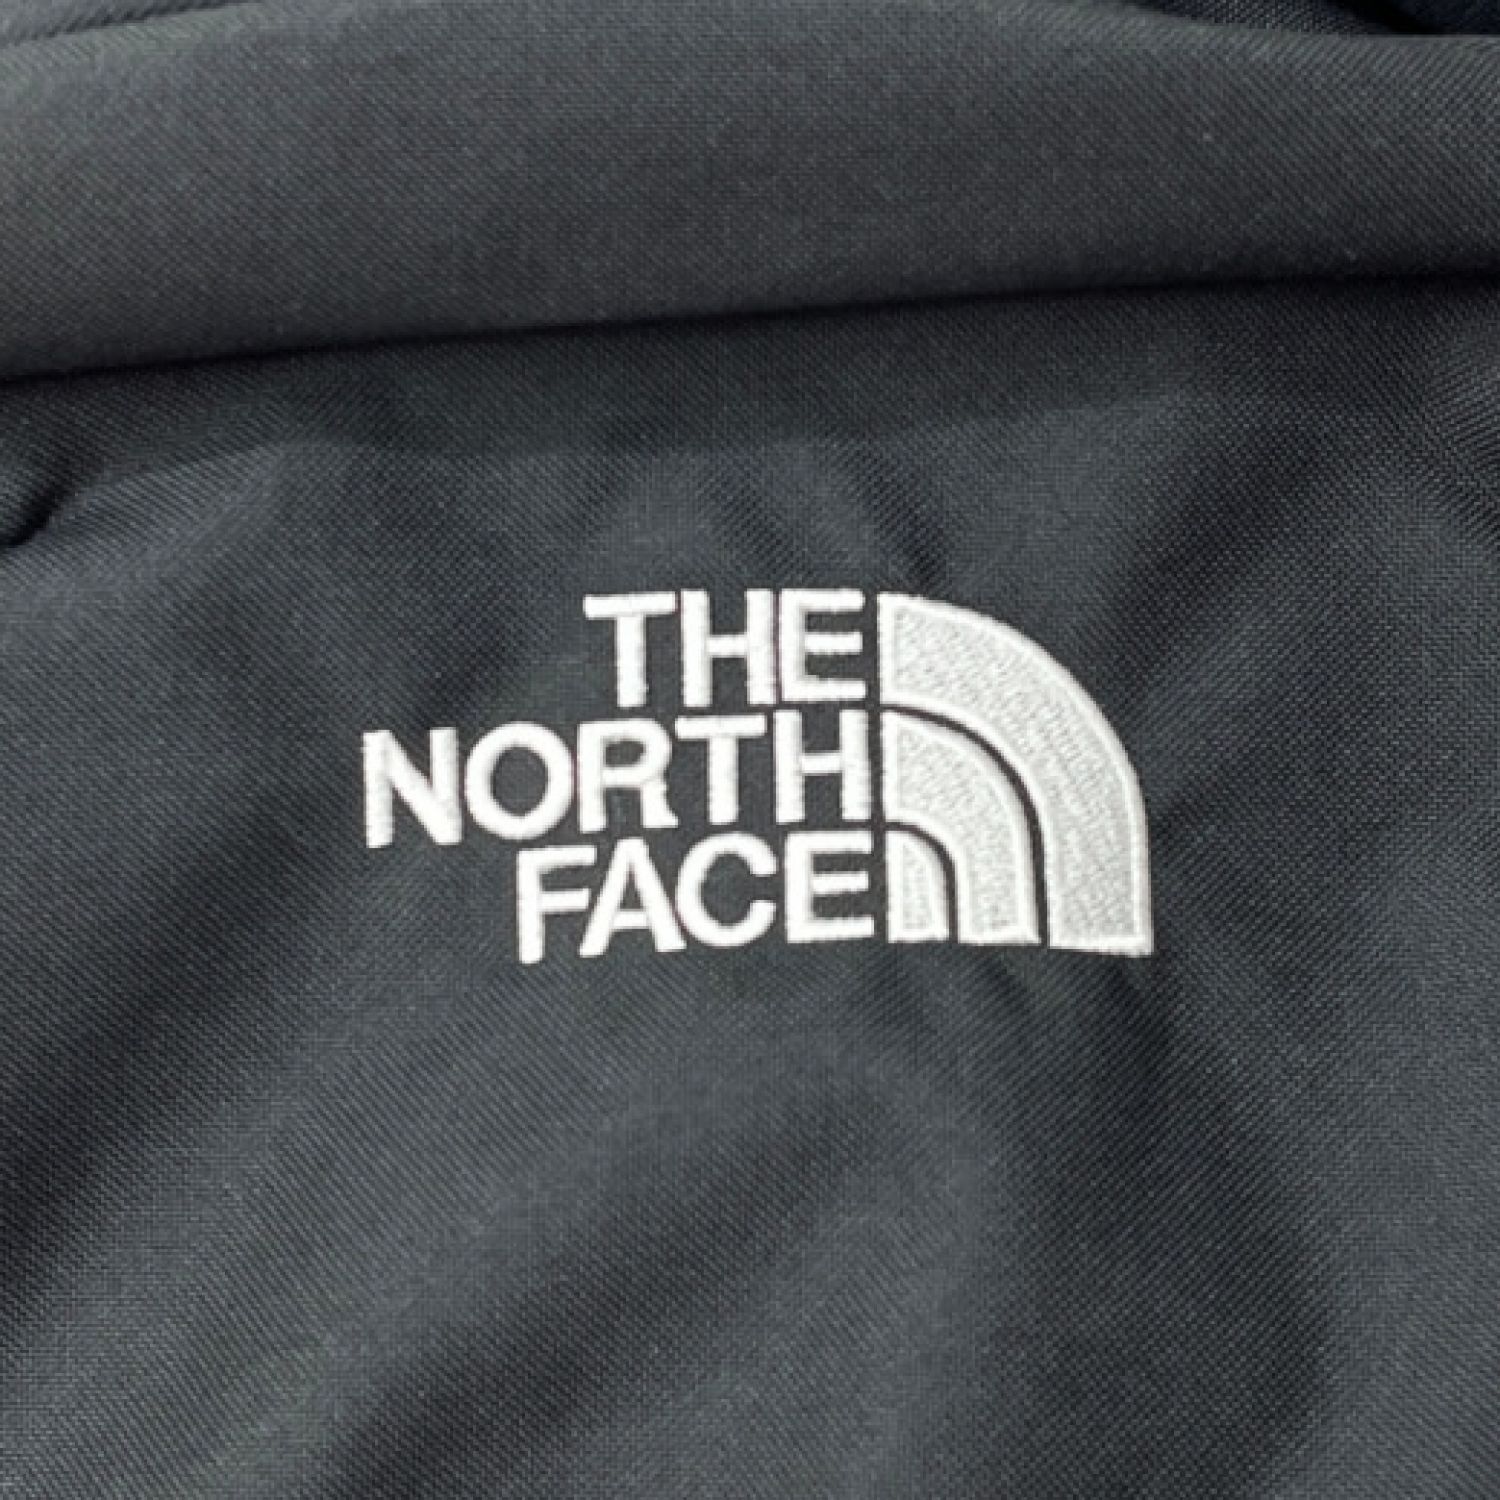 THE NORTH FACE リュックサック ブラック NF0A3VY2 JK